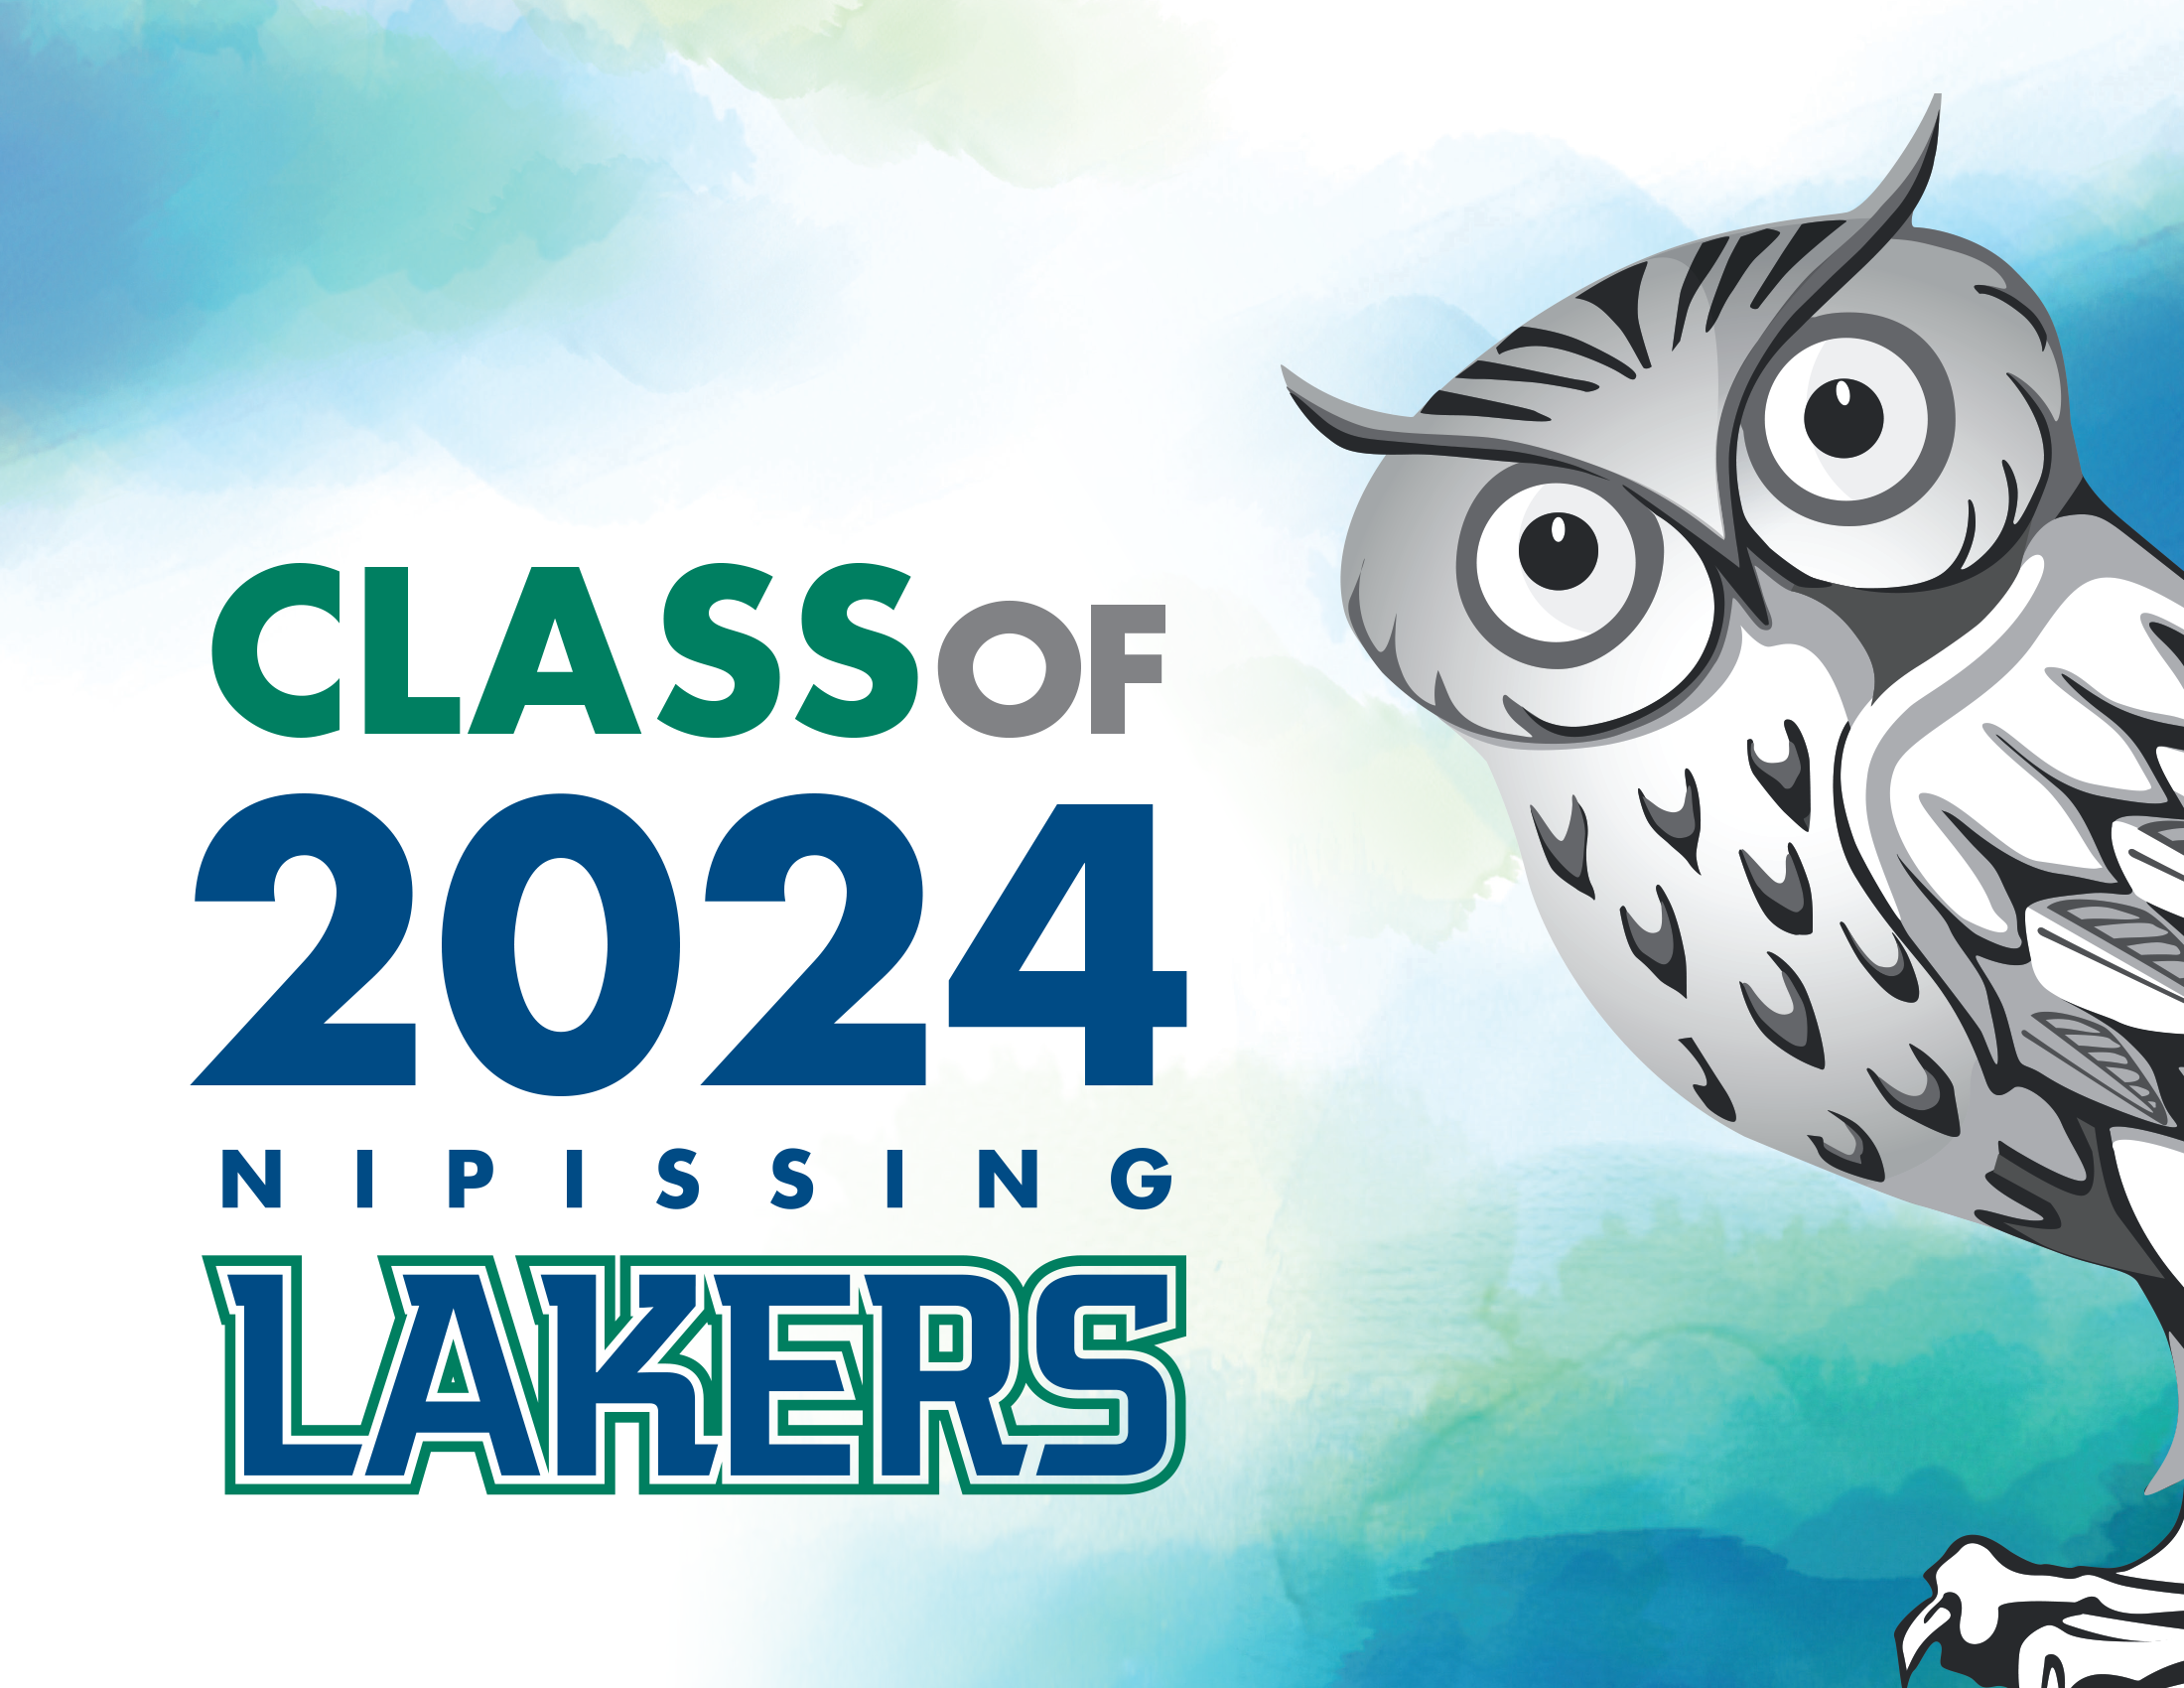 Class of 2024 Lakers Owl sign